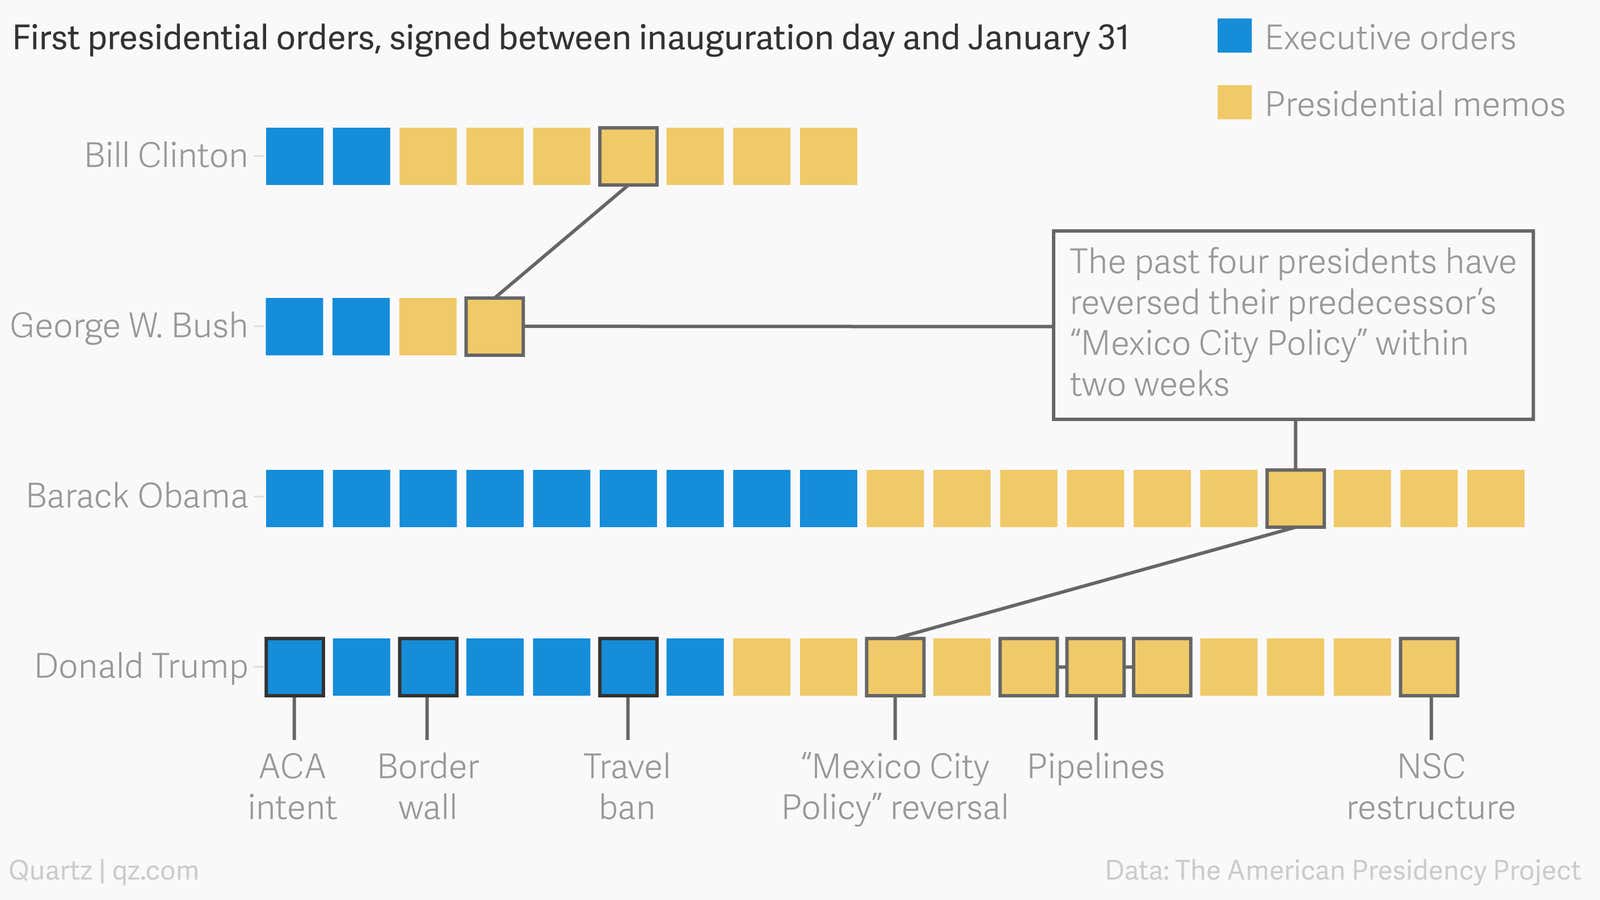 Barack Obama signed more executive actions in his first 12 days than Donald Trump